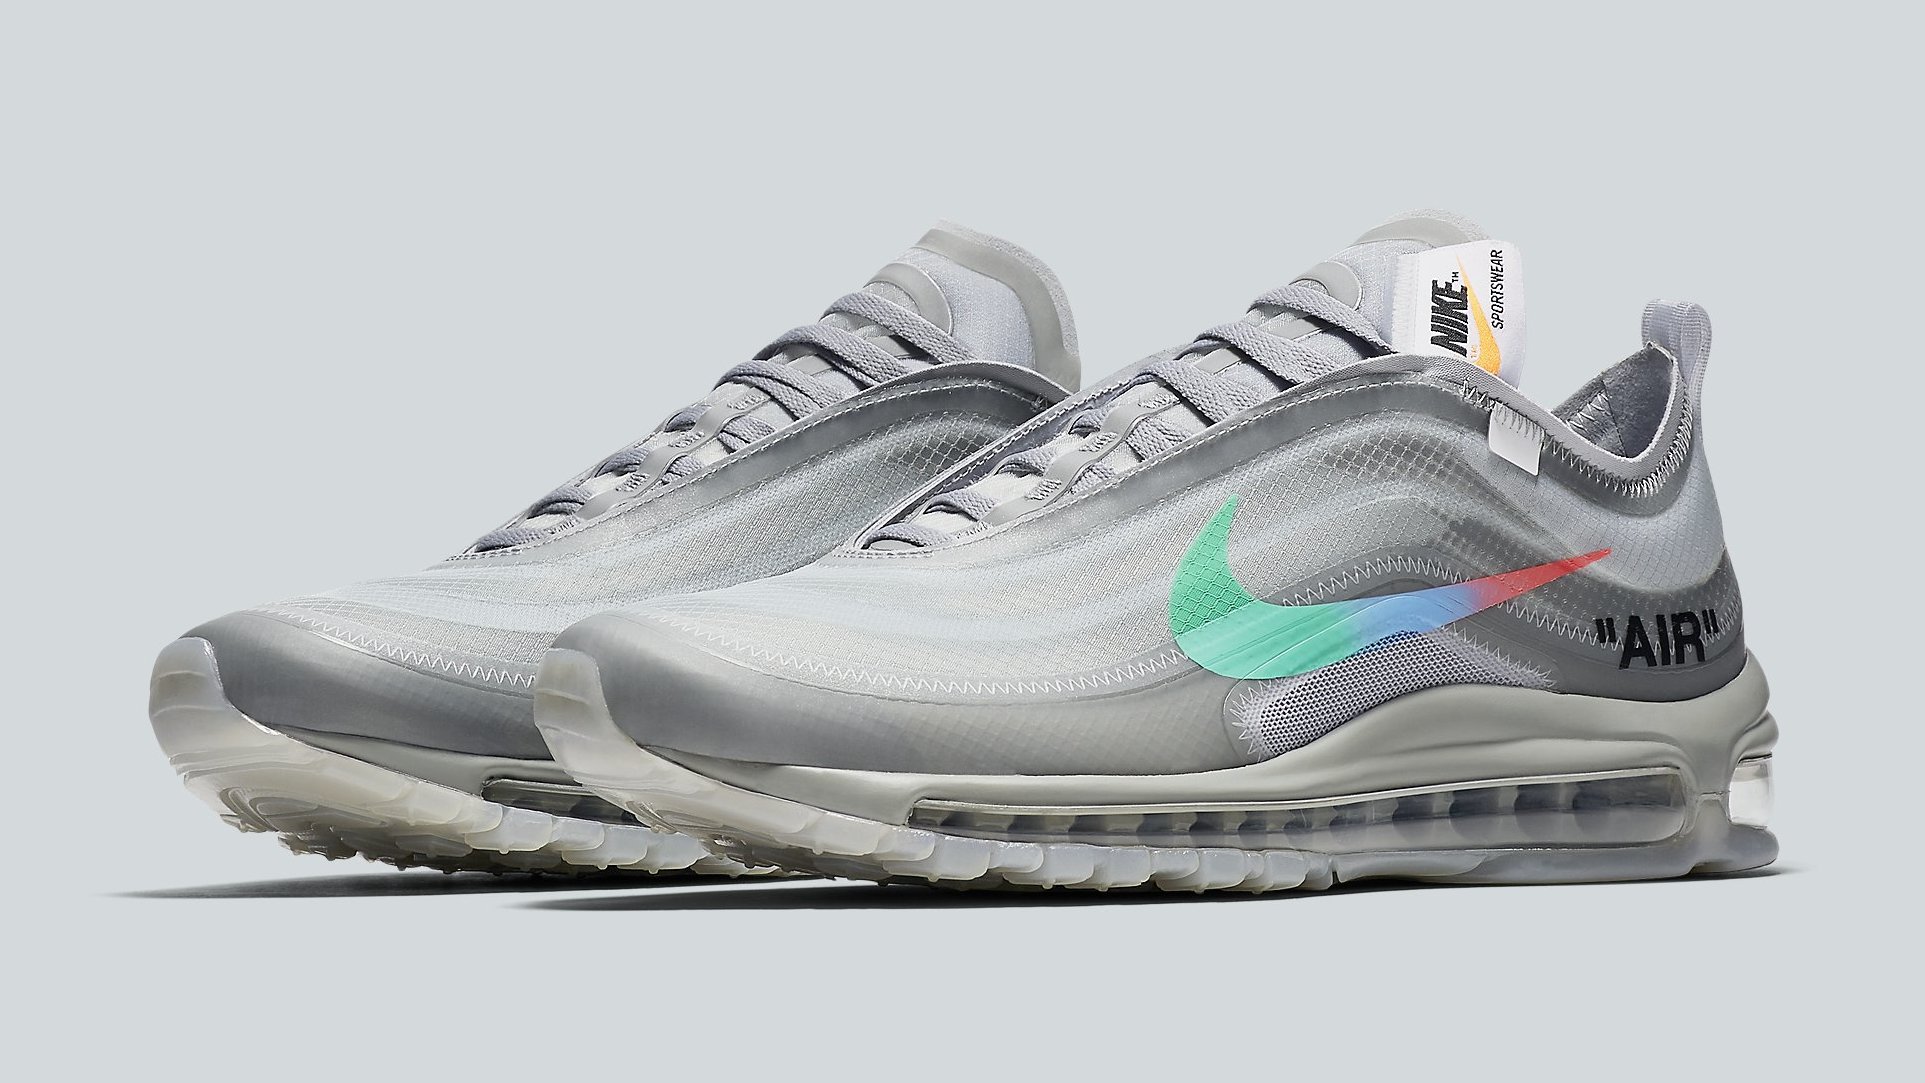 New Release Information for the Off-White x Air Max 97